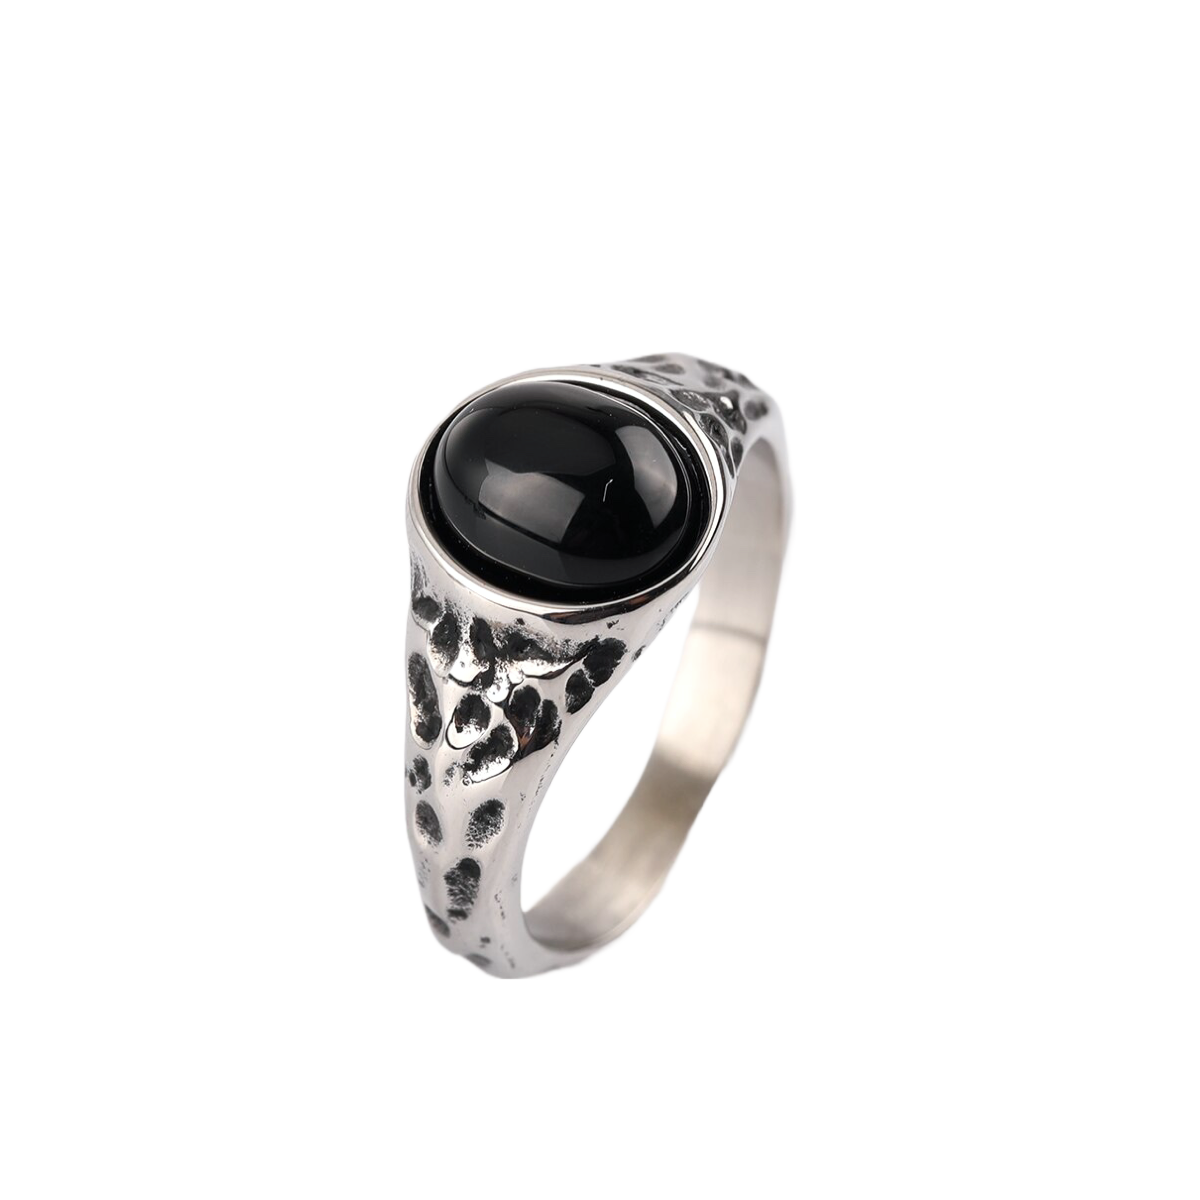 Hammered Stone Ring